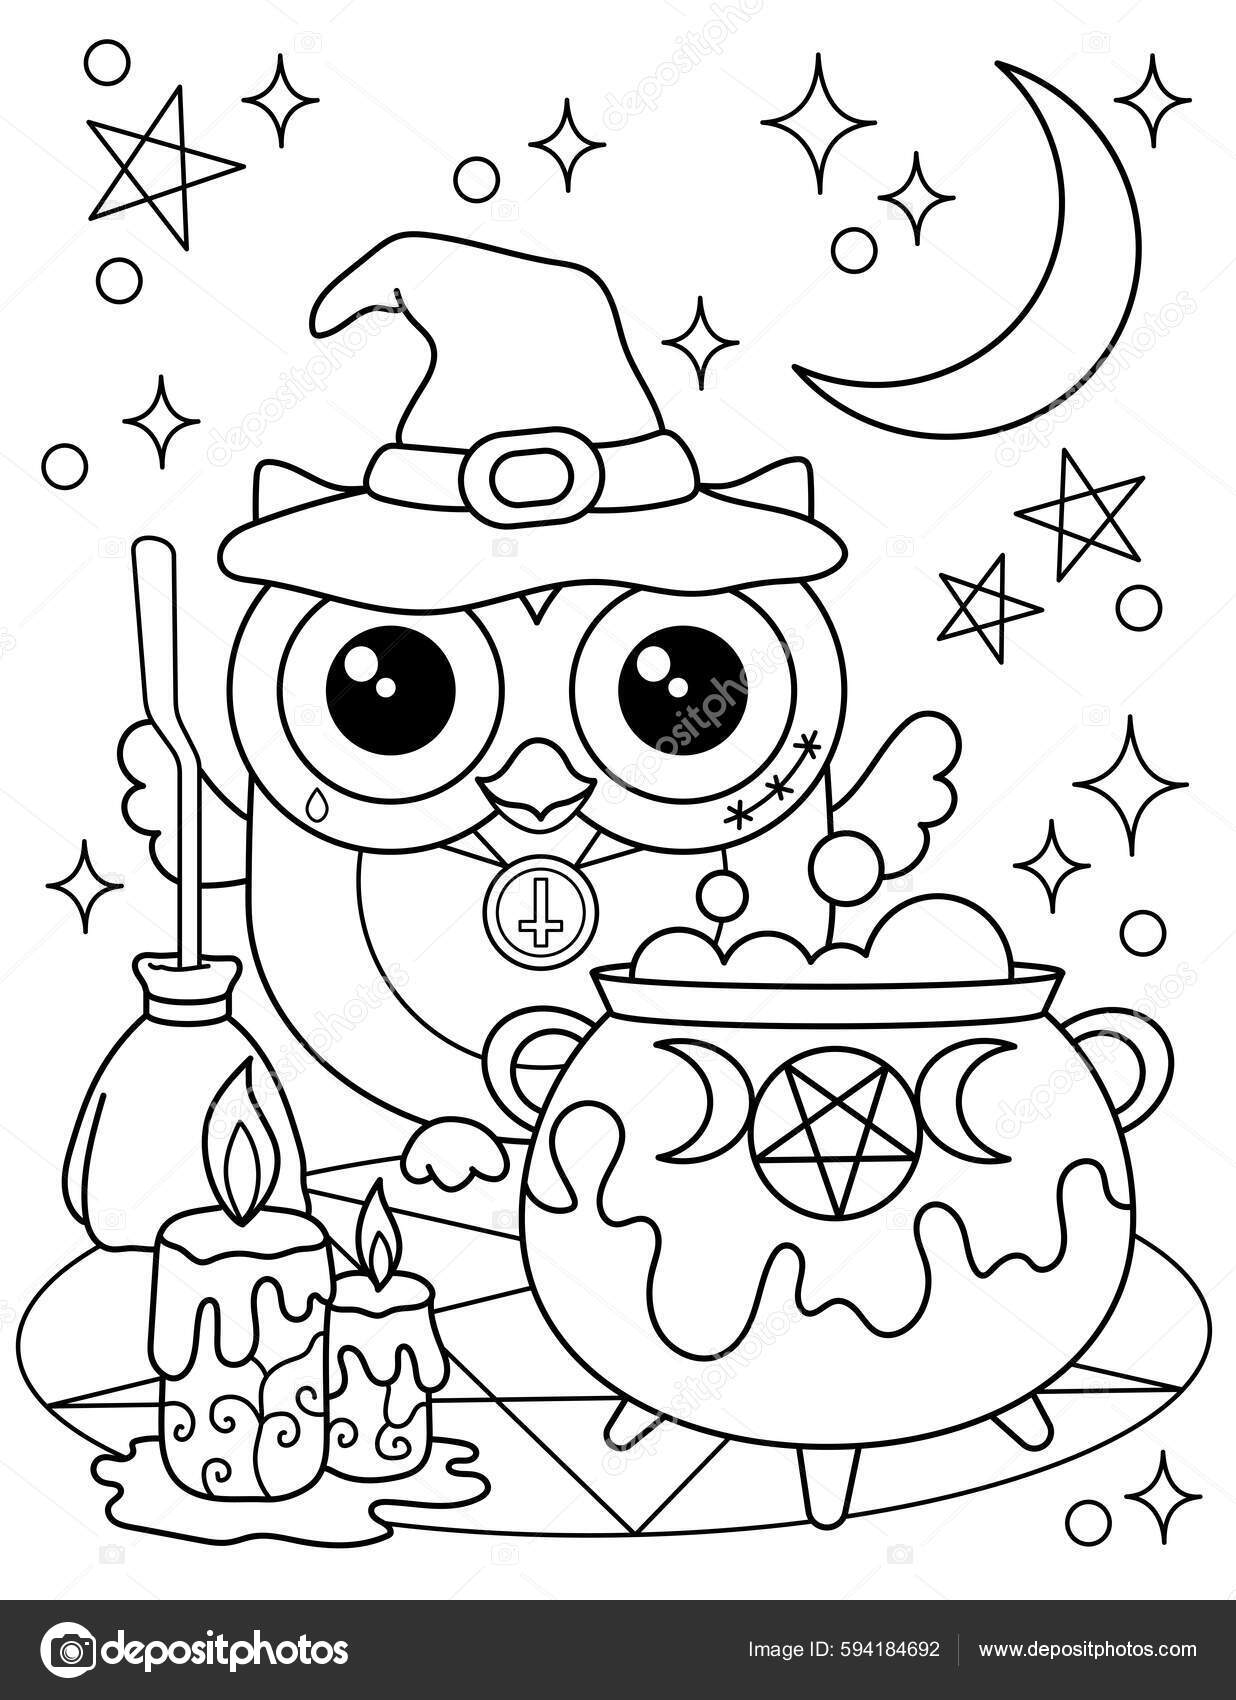 Halloween coloring page owl witch hat cauldron broom nice black stock vector by meineillustrations